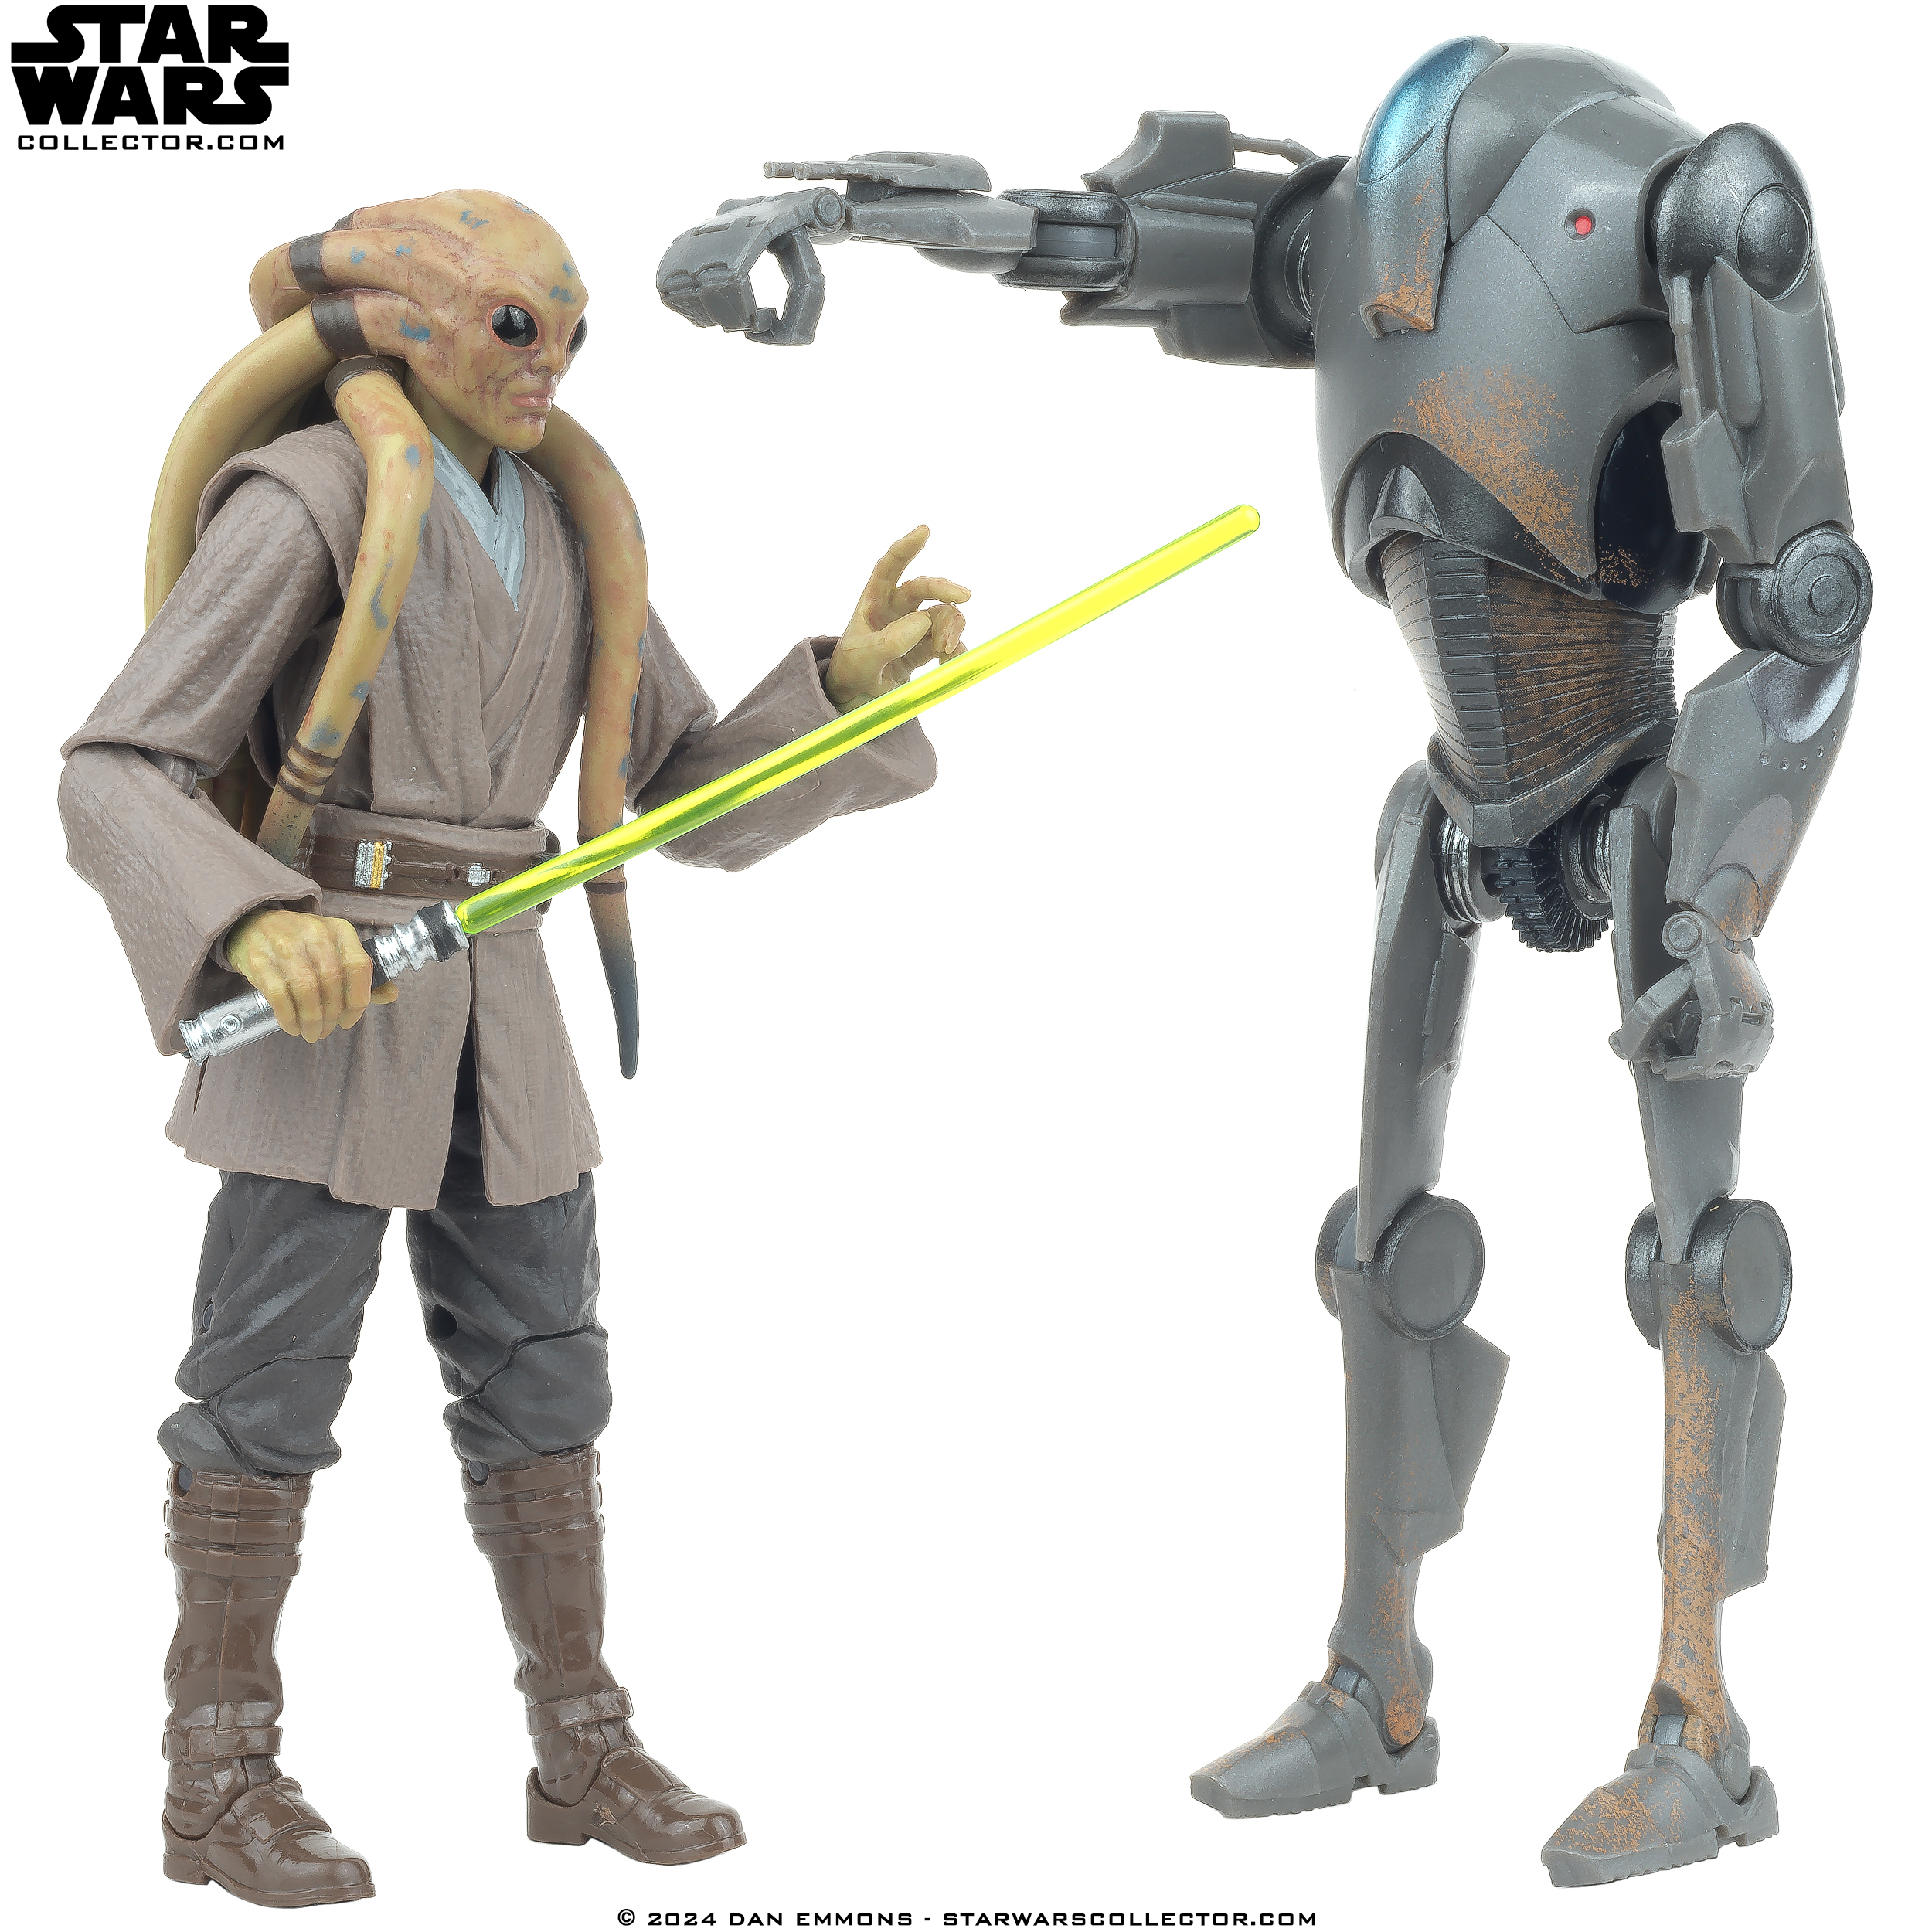 Would you Buy A The Black Series 6-Inch Kit Fisto & Super Battle Droid Set?